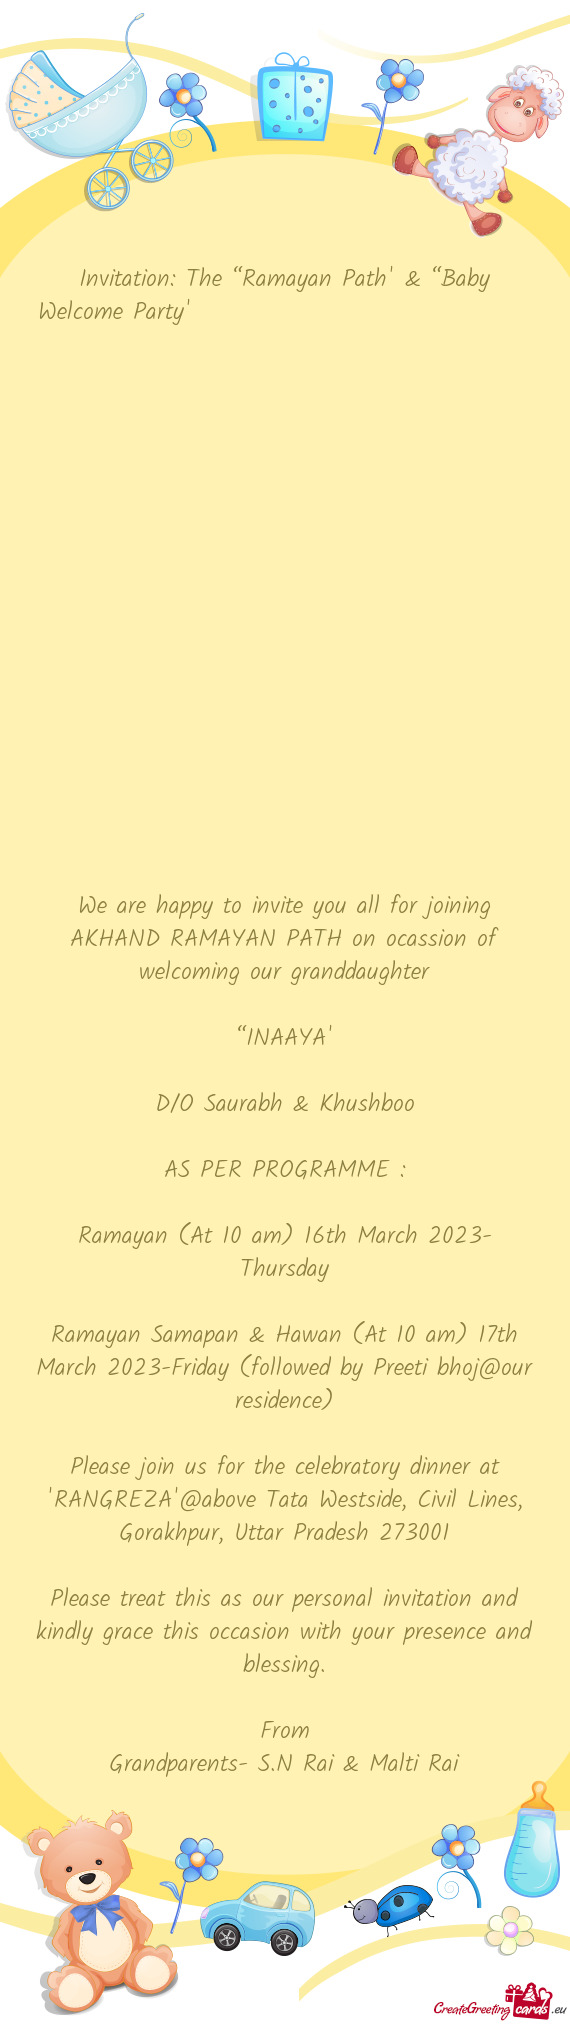 Invitation: The “Ramayan Path” & “Baby Welcome Party”